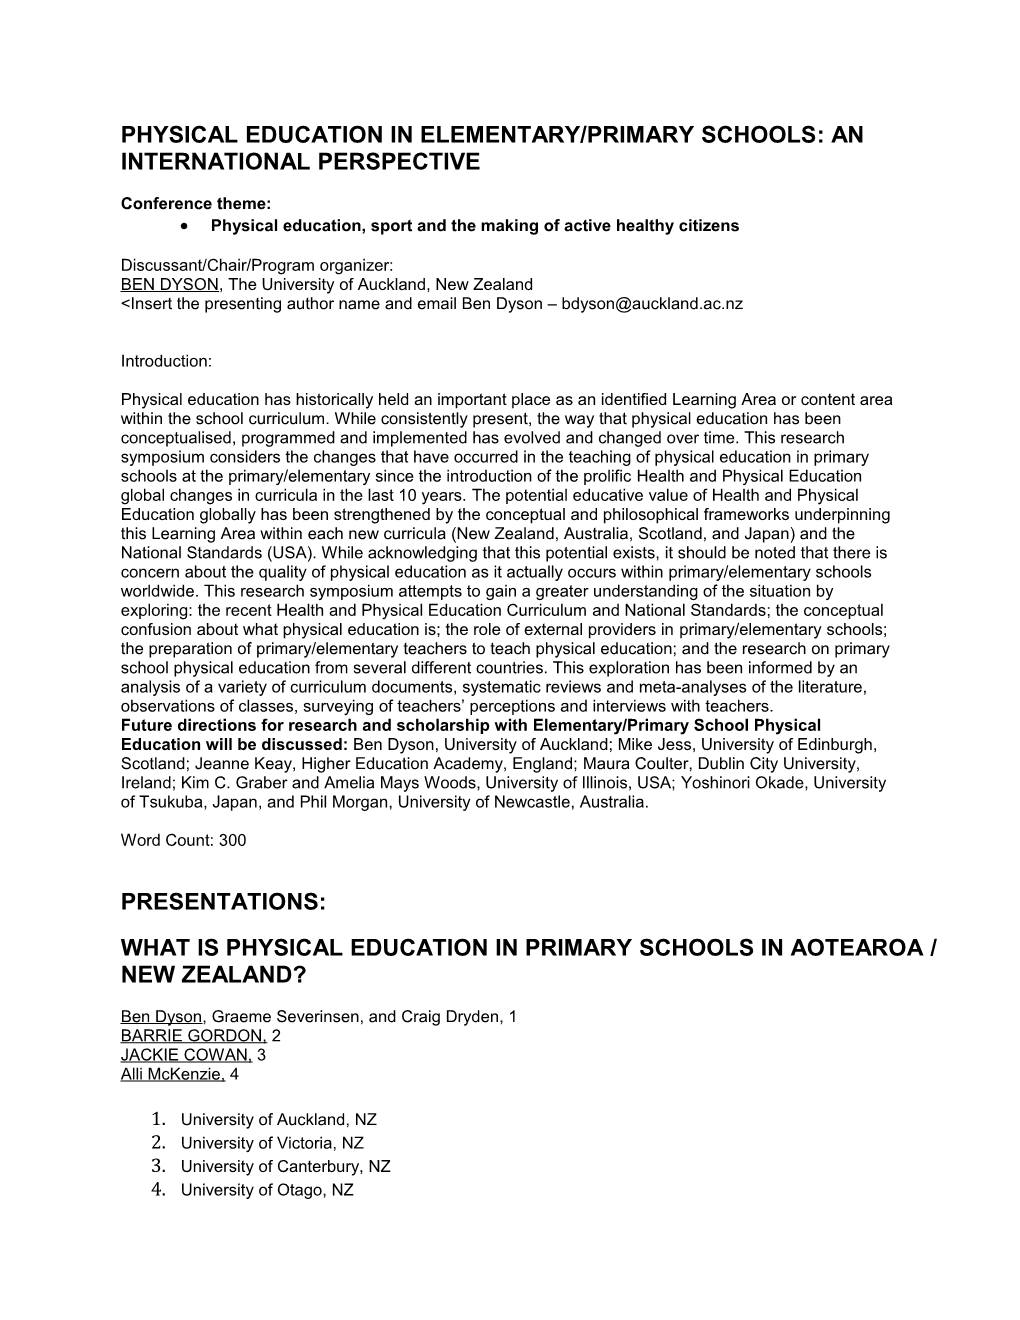 Physical Education in Elementary/Primary Schools: an International Perspective